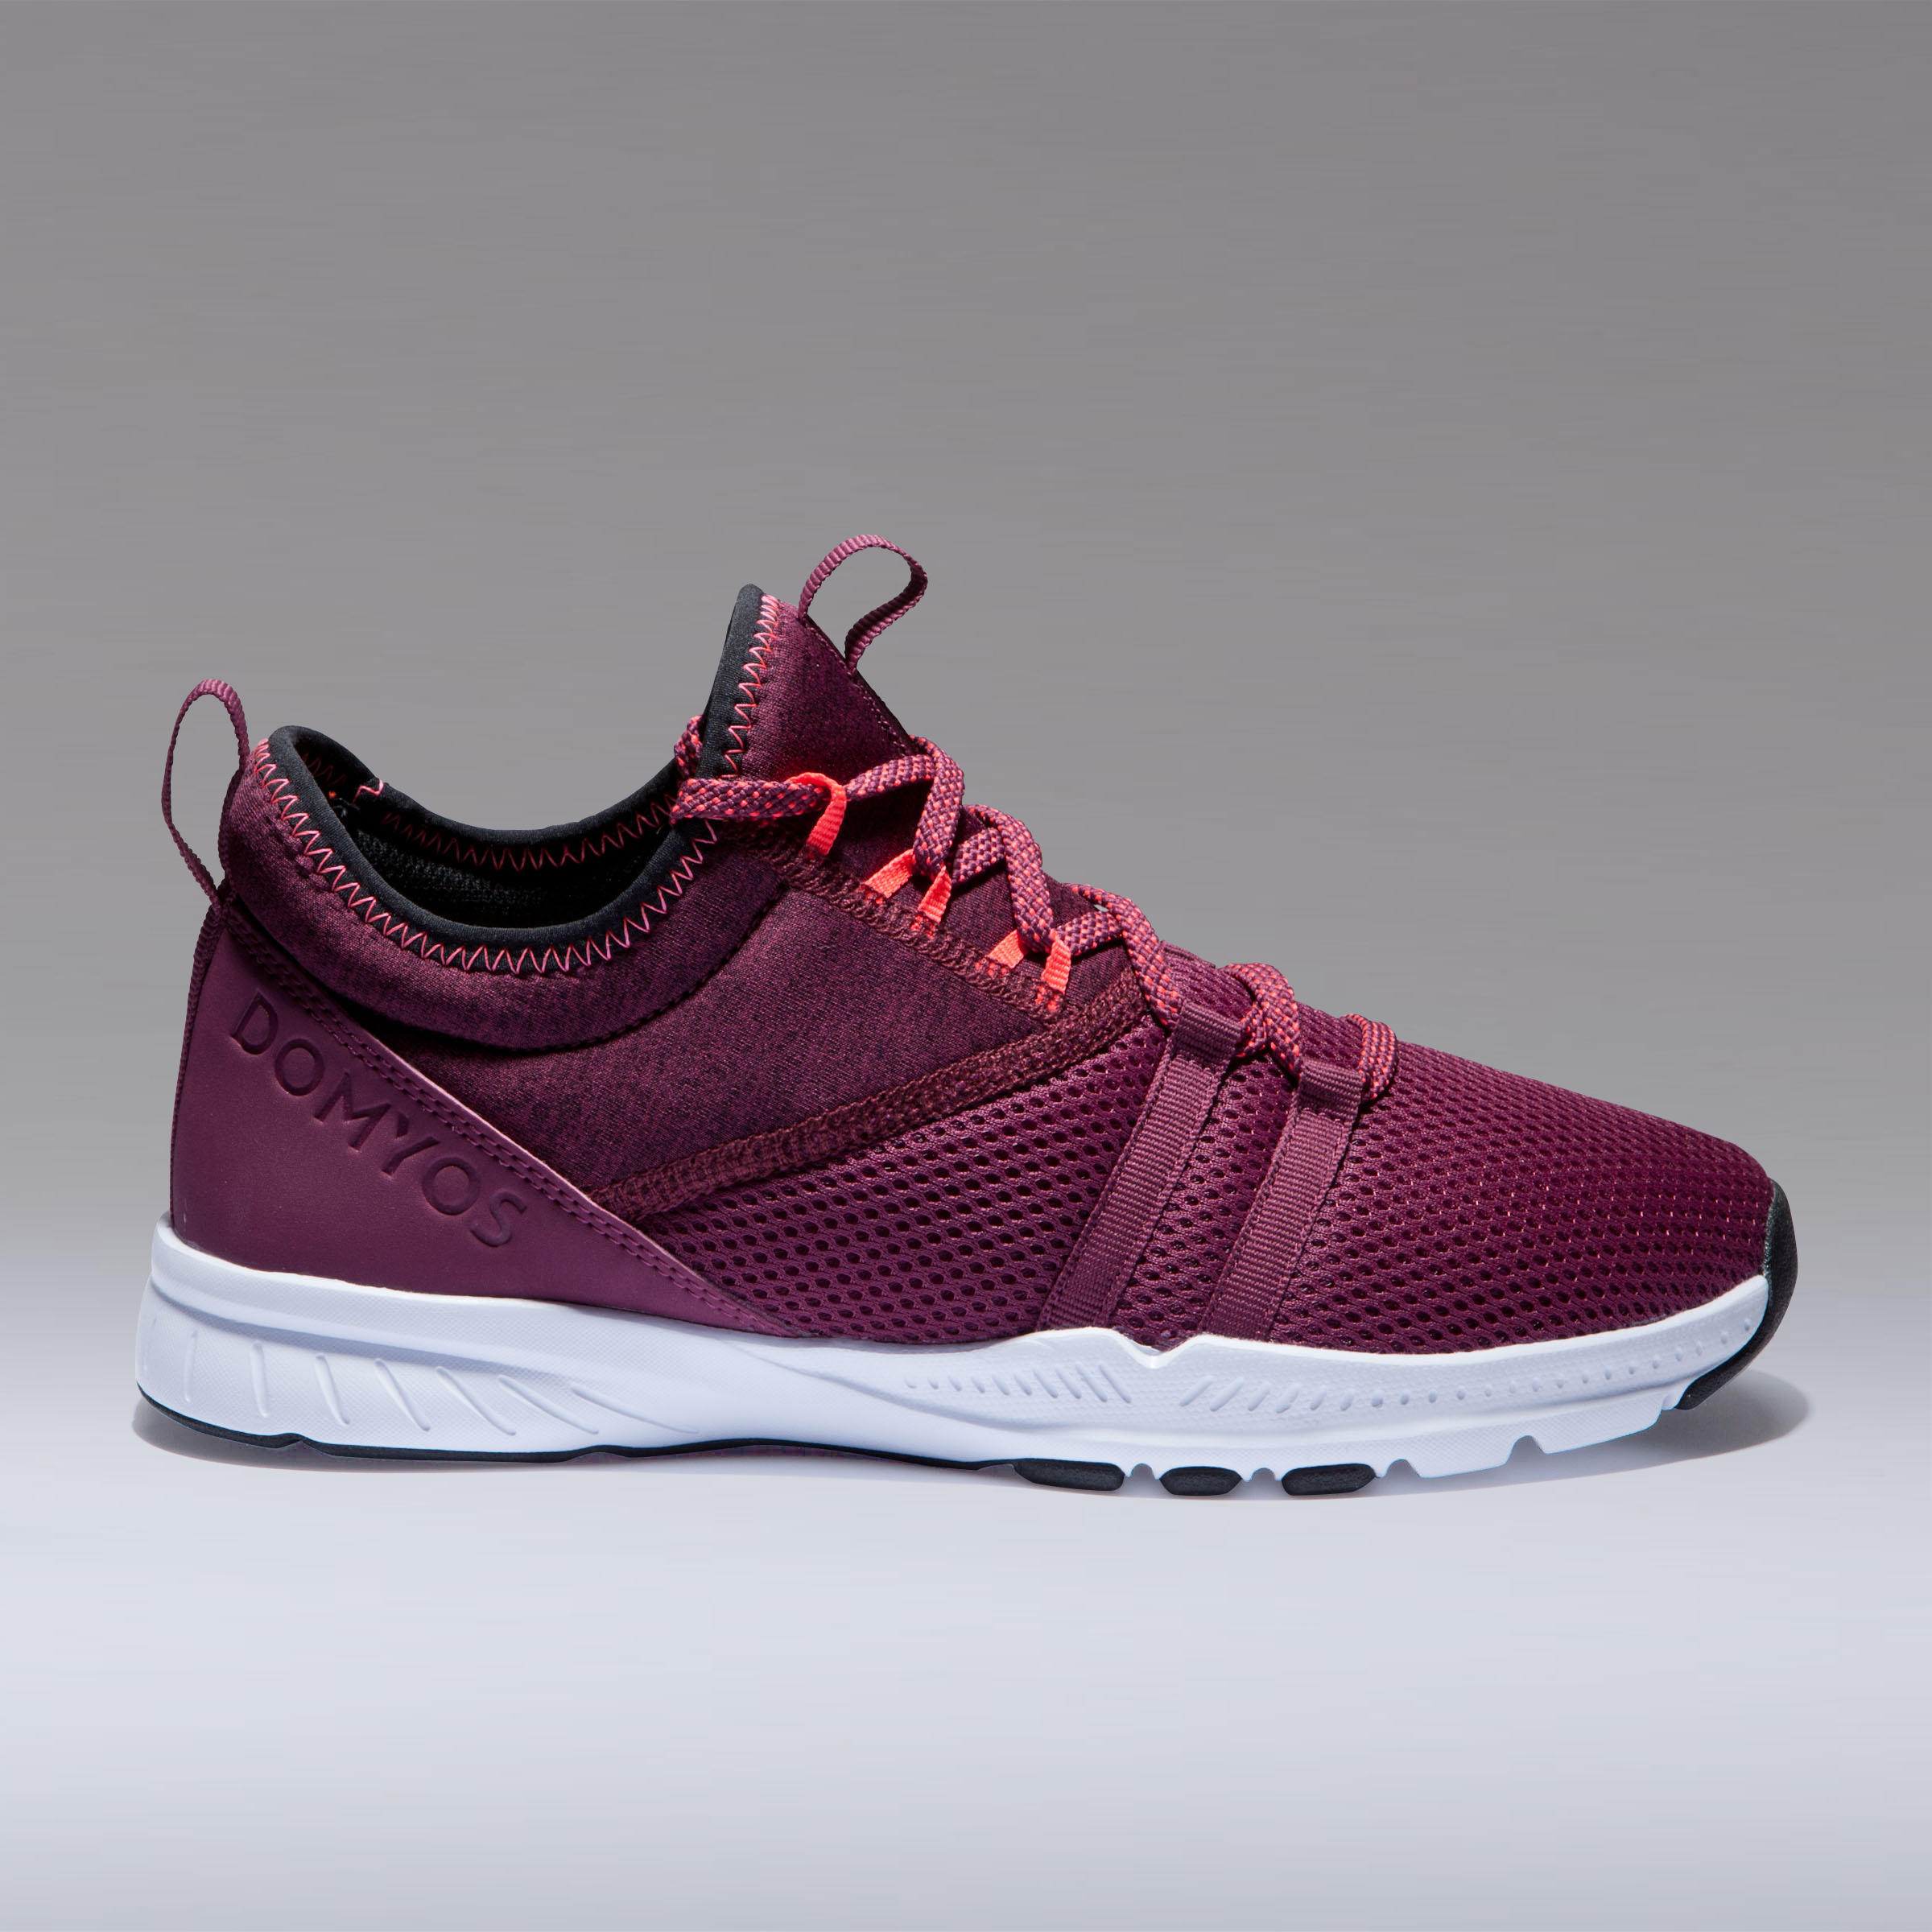 Women's Fitness Shoes 120 Mid - Burgundy 3/16